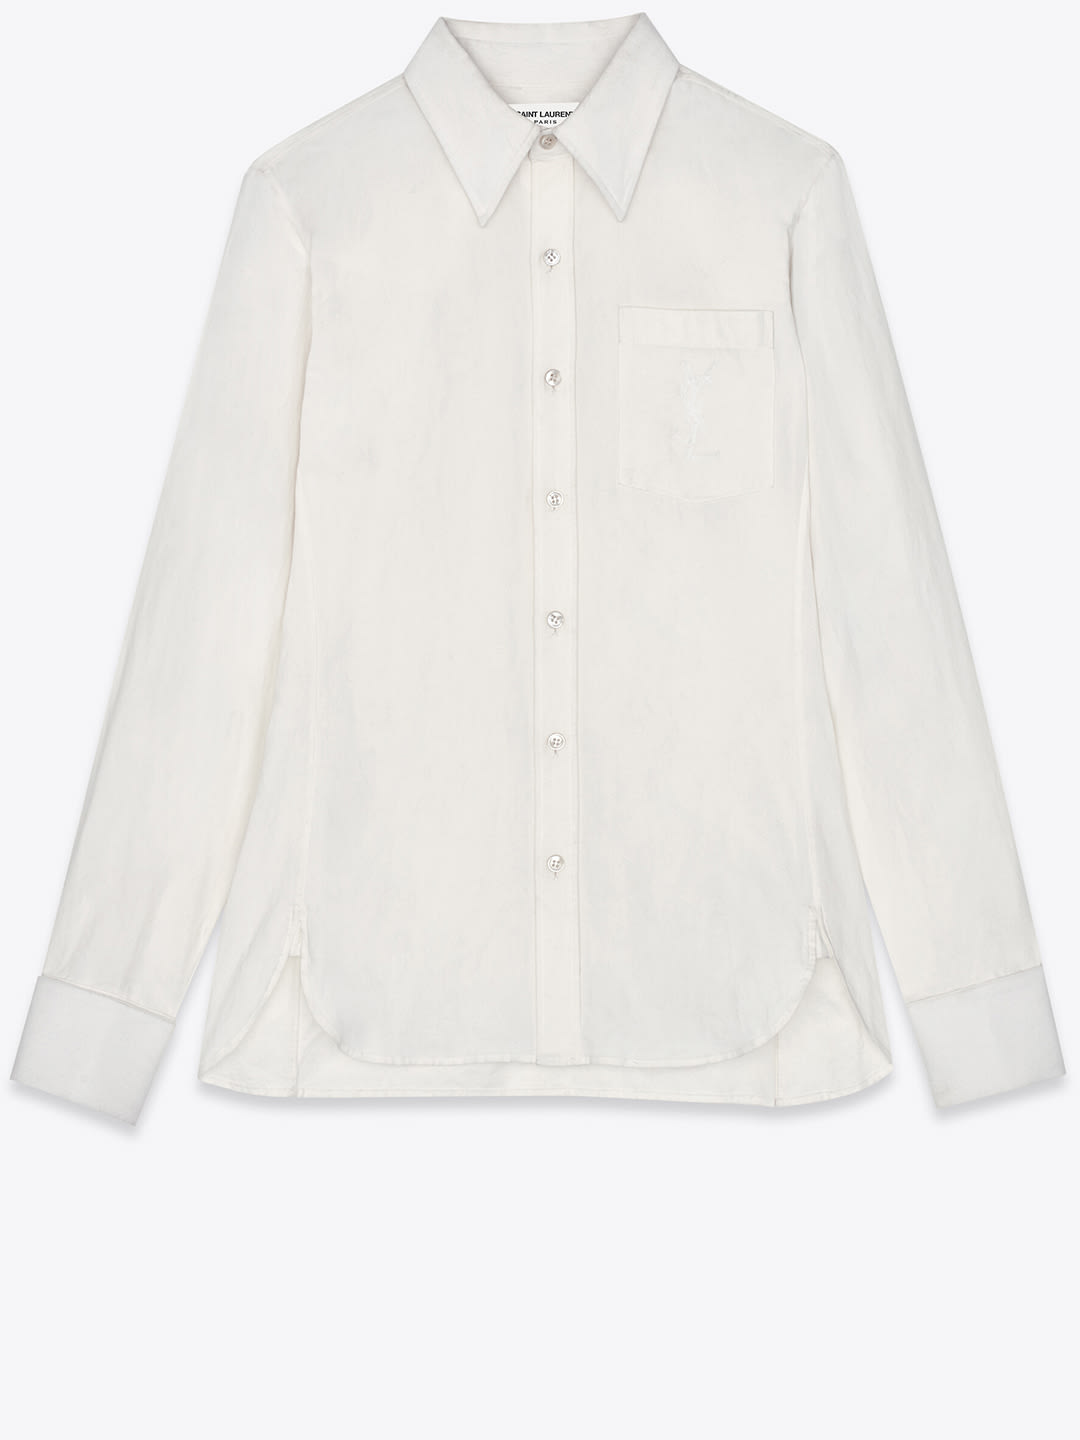 Saint Laurent Monogram Embroidered Shirt In Cotton And Linen